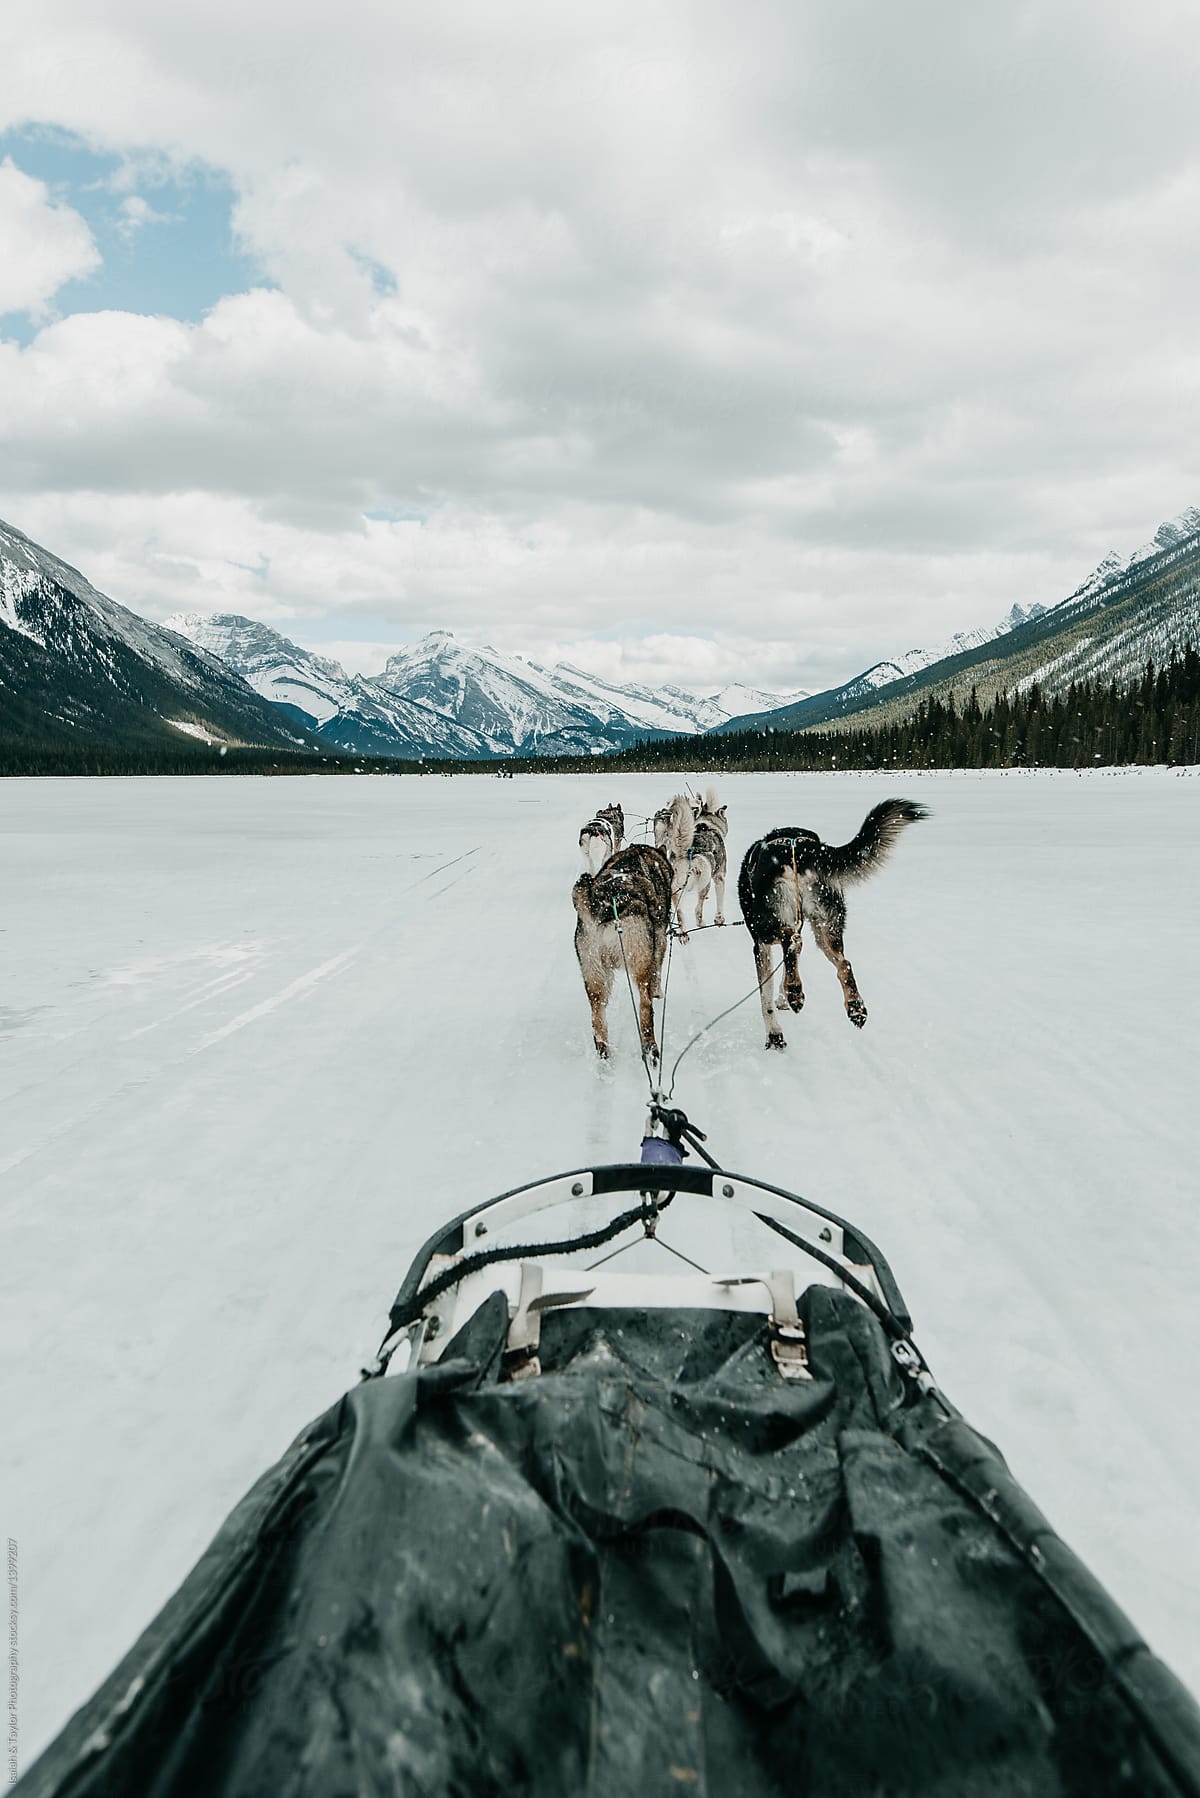 An action shot of dog sledding over a frozen lake in the mountains with the sleigh in the foreground